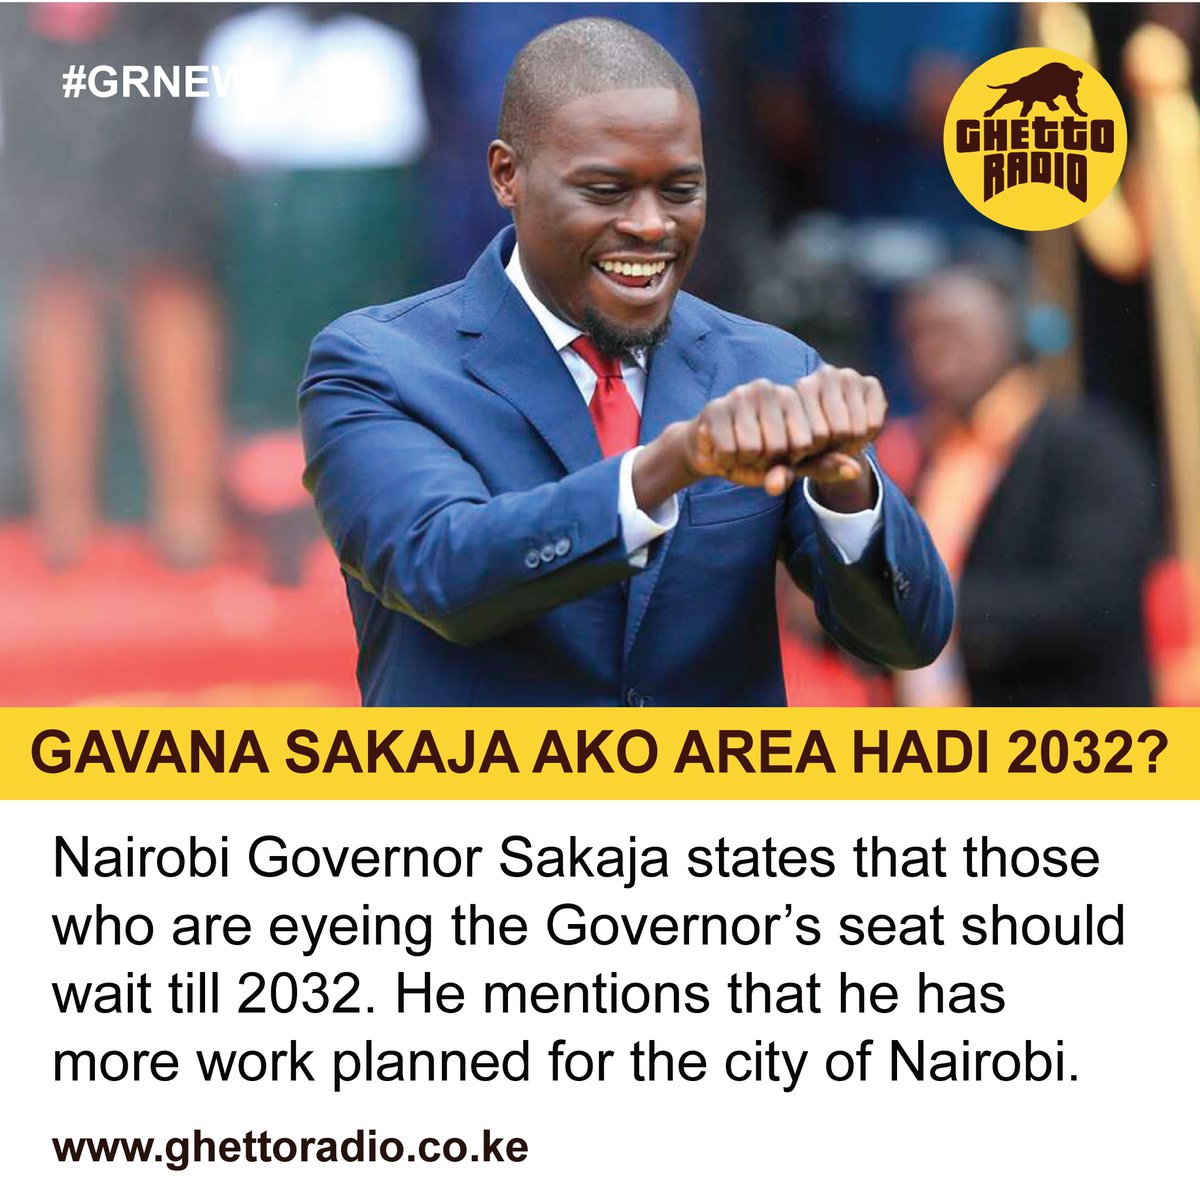 Sakaja states that those eyeing the Governor's seat should wait till 2032.
#GRNews
#Goteana